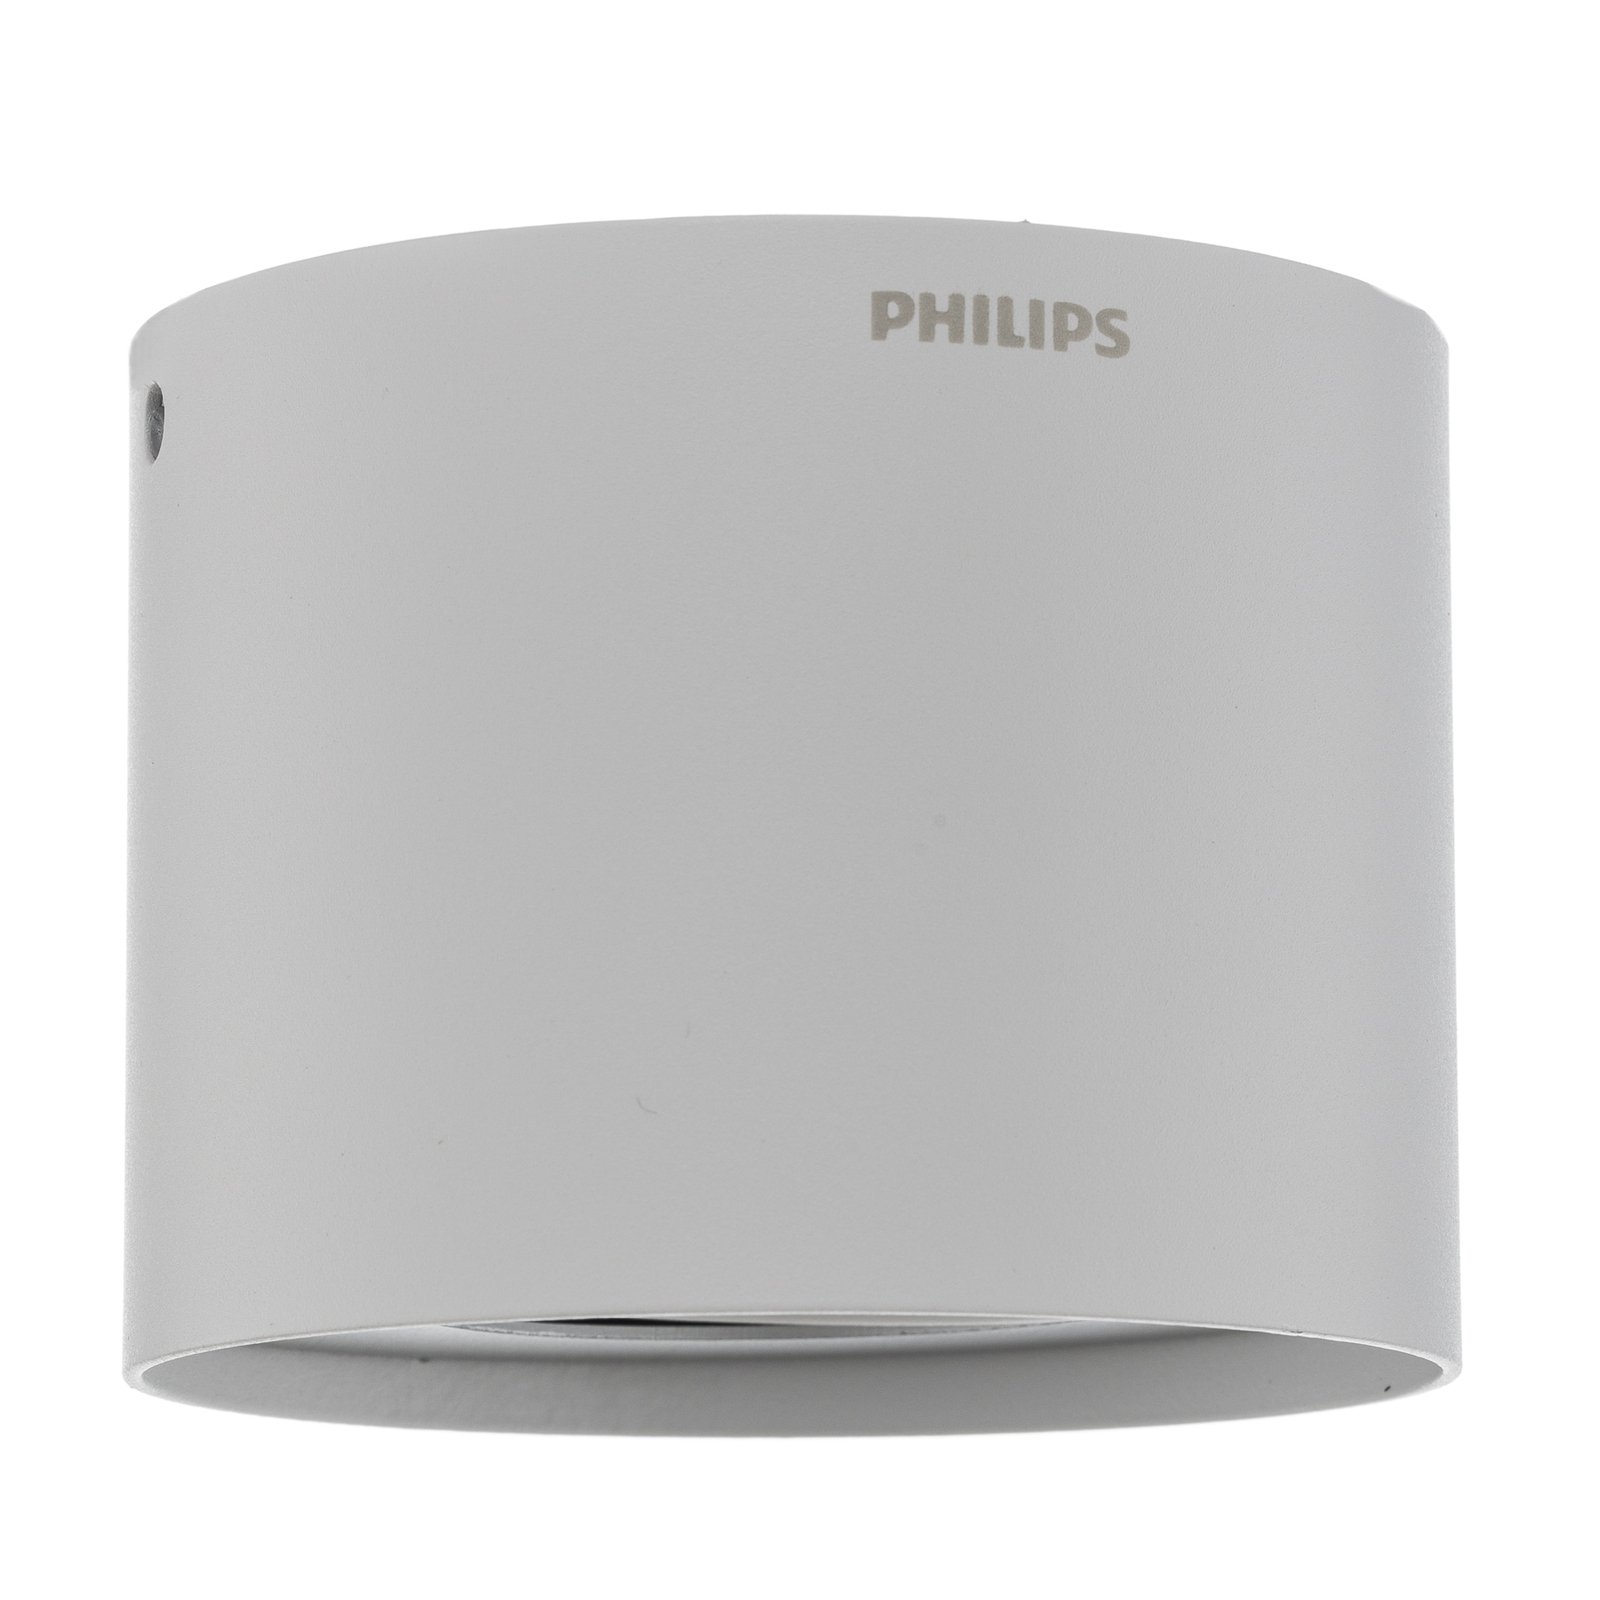 Philips Phase LED-Downlight weiß 1-flammig